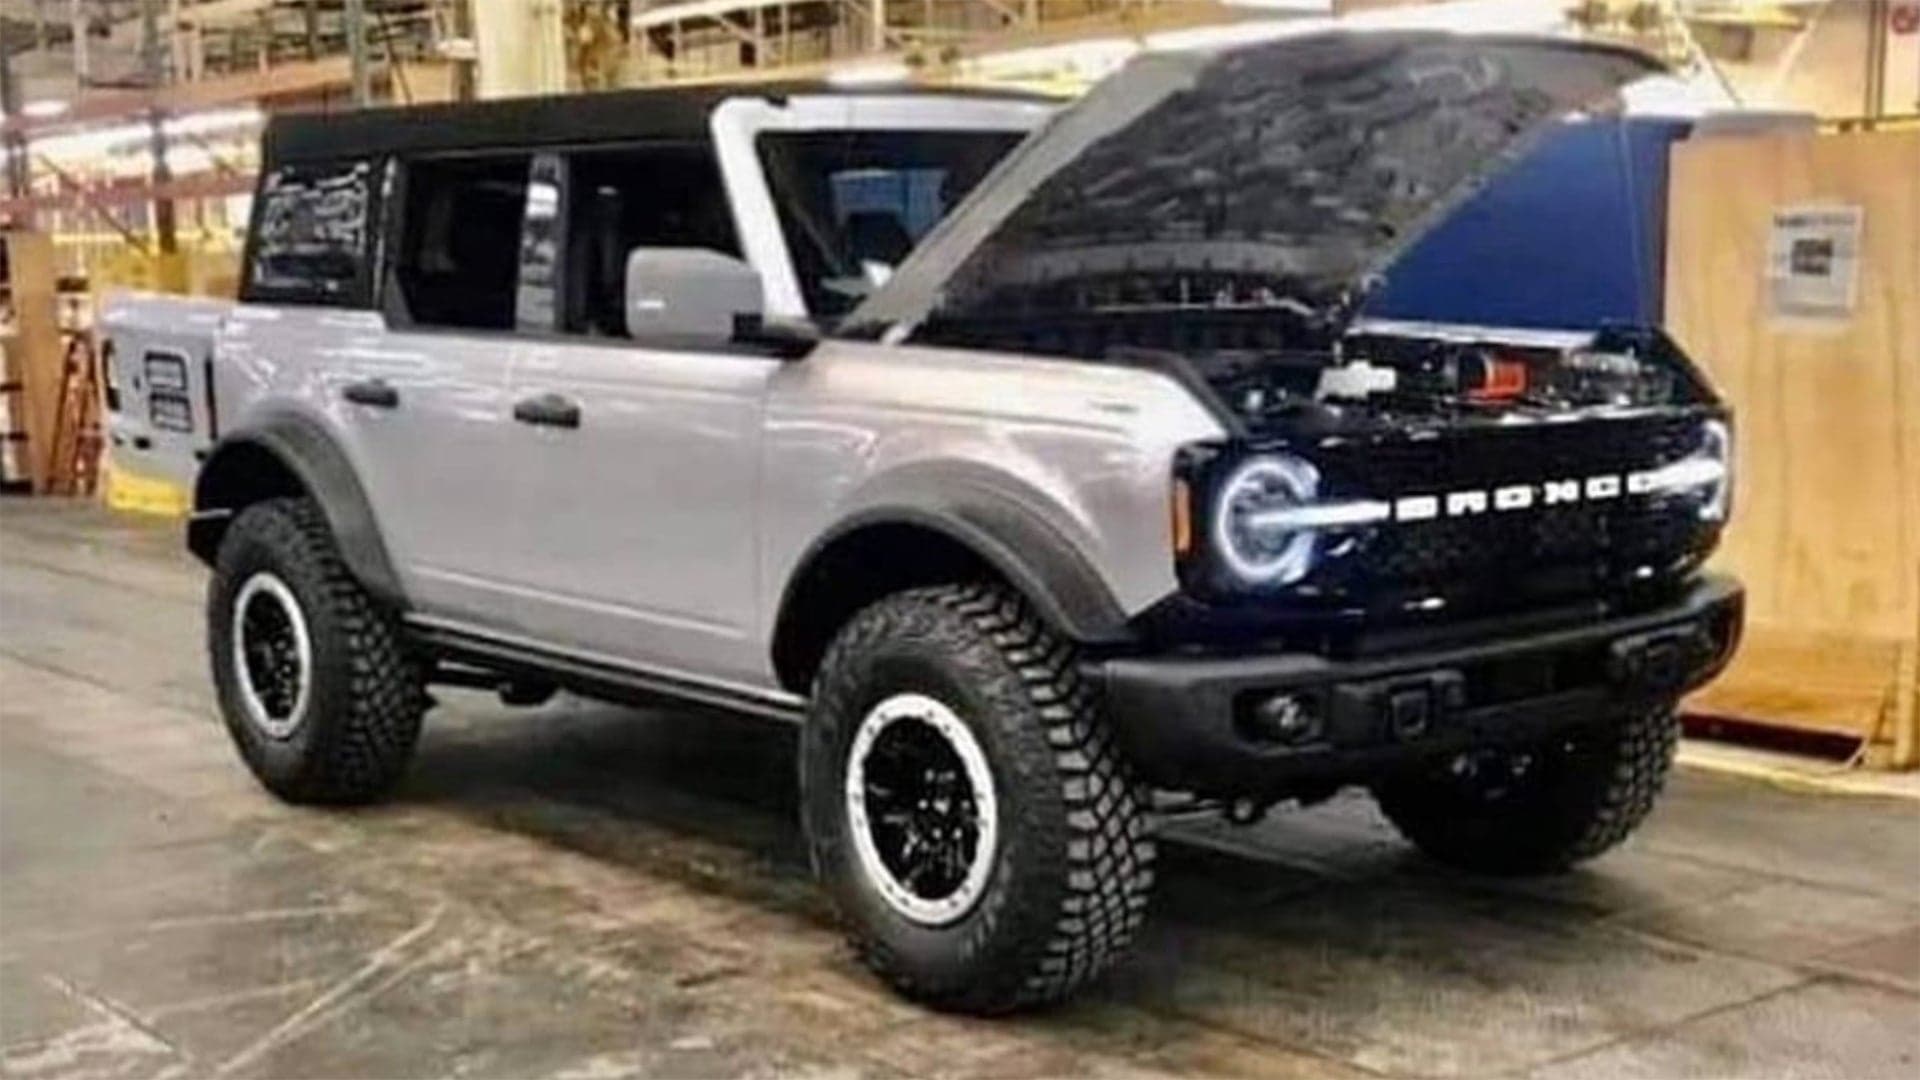 2021 Ford Bronco Photo: Here’s Your First Look at the Real Thing